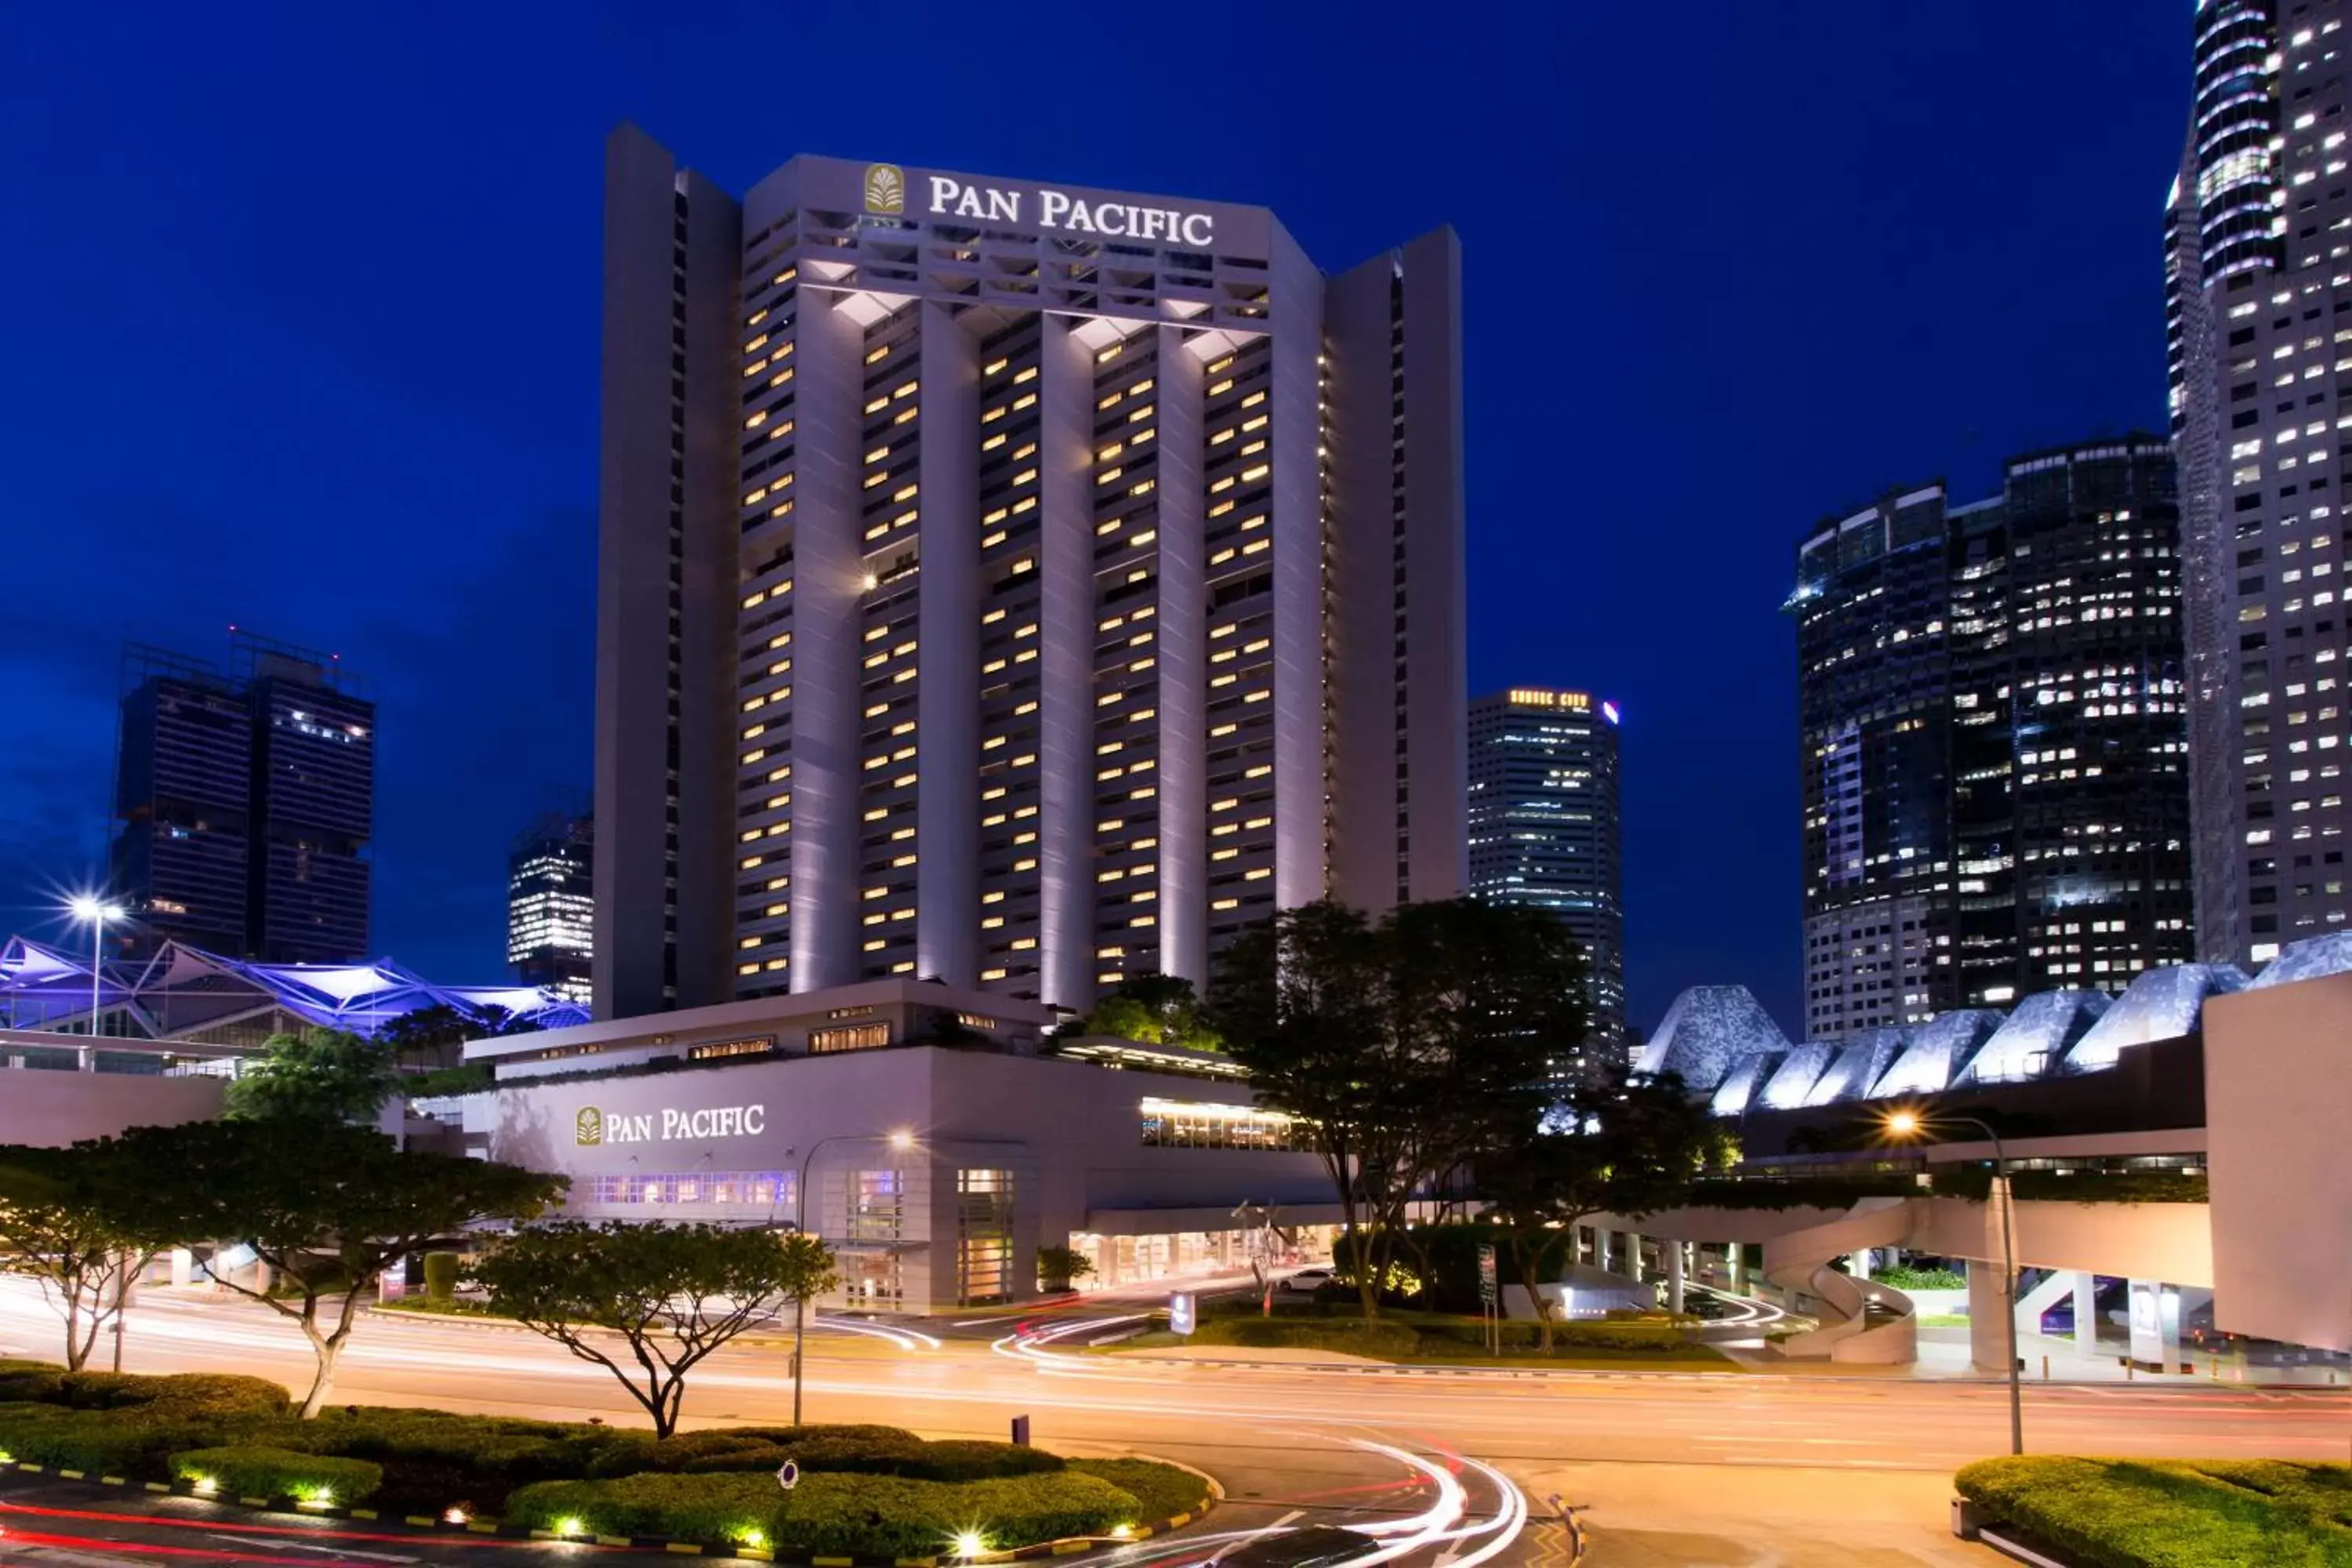 Property building in Pan Pacific Singapore